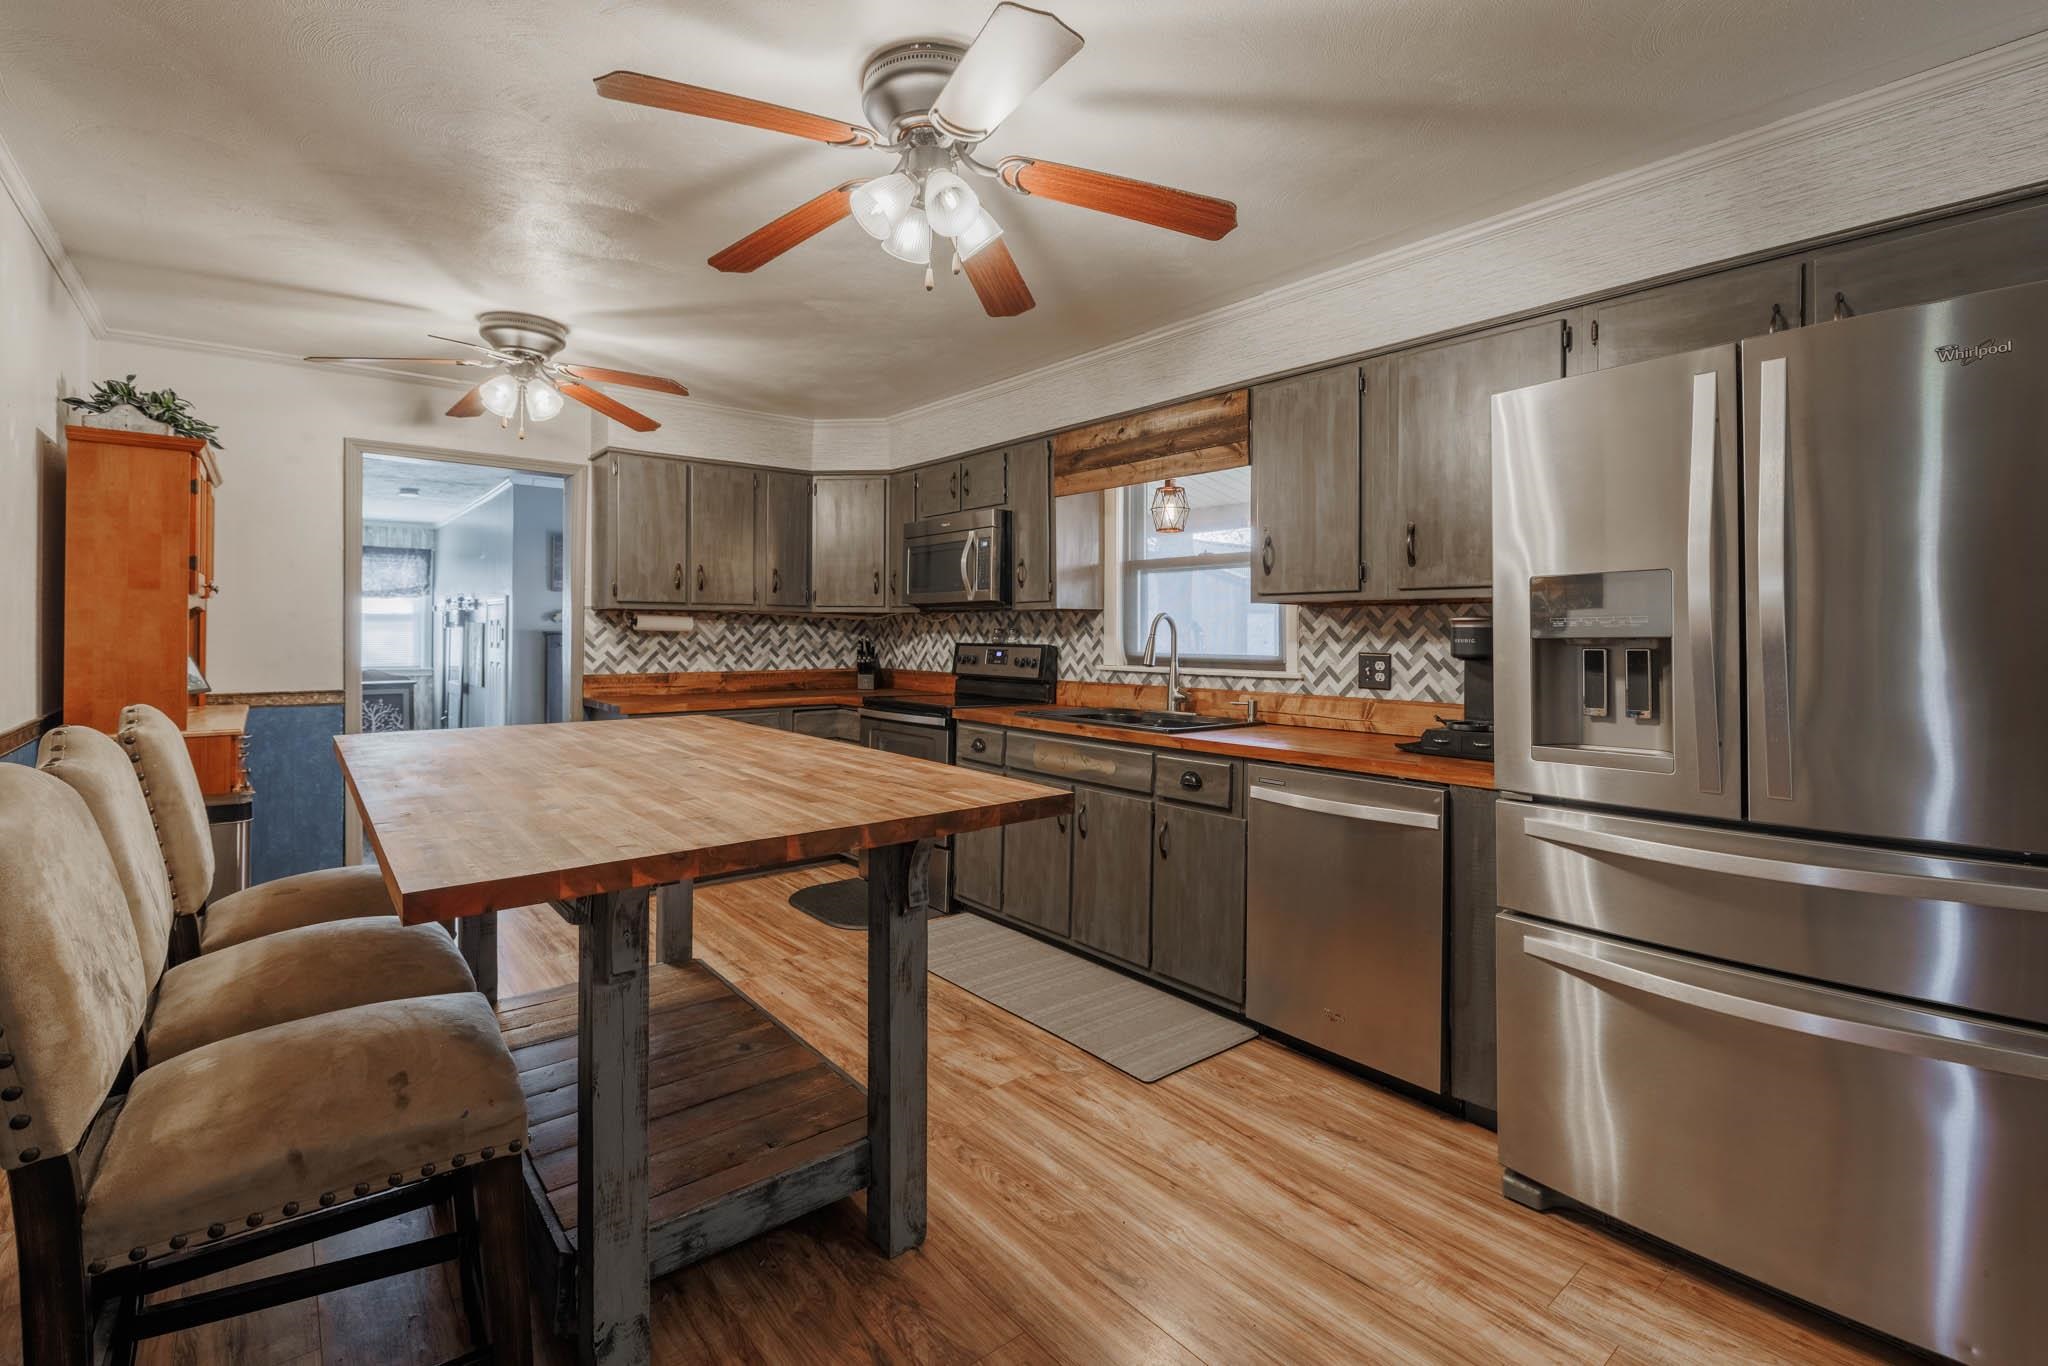 Stainless steel appliances, tiled backsplash, butcher block counter tops and table.